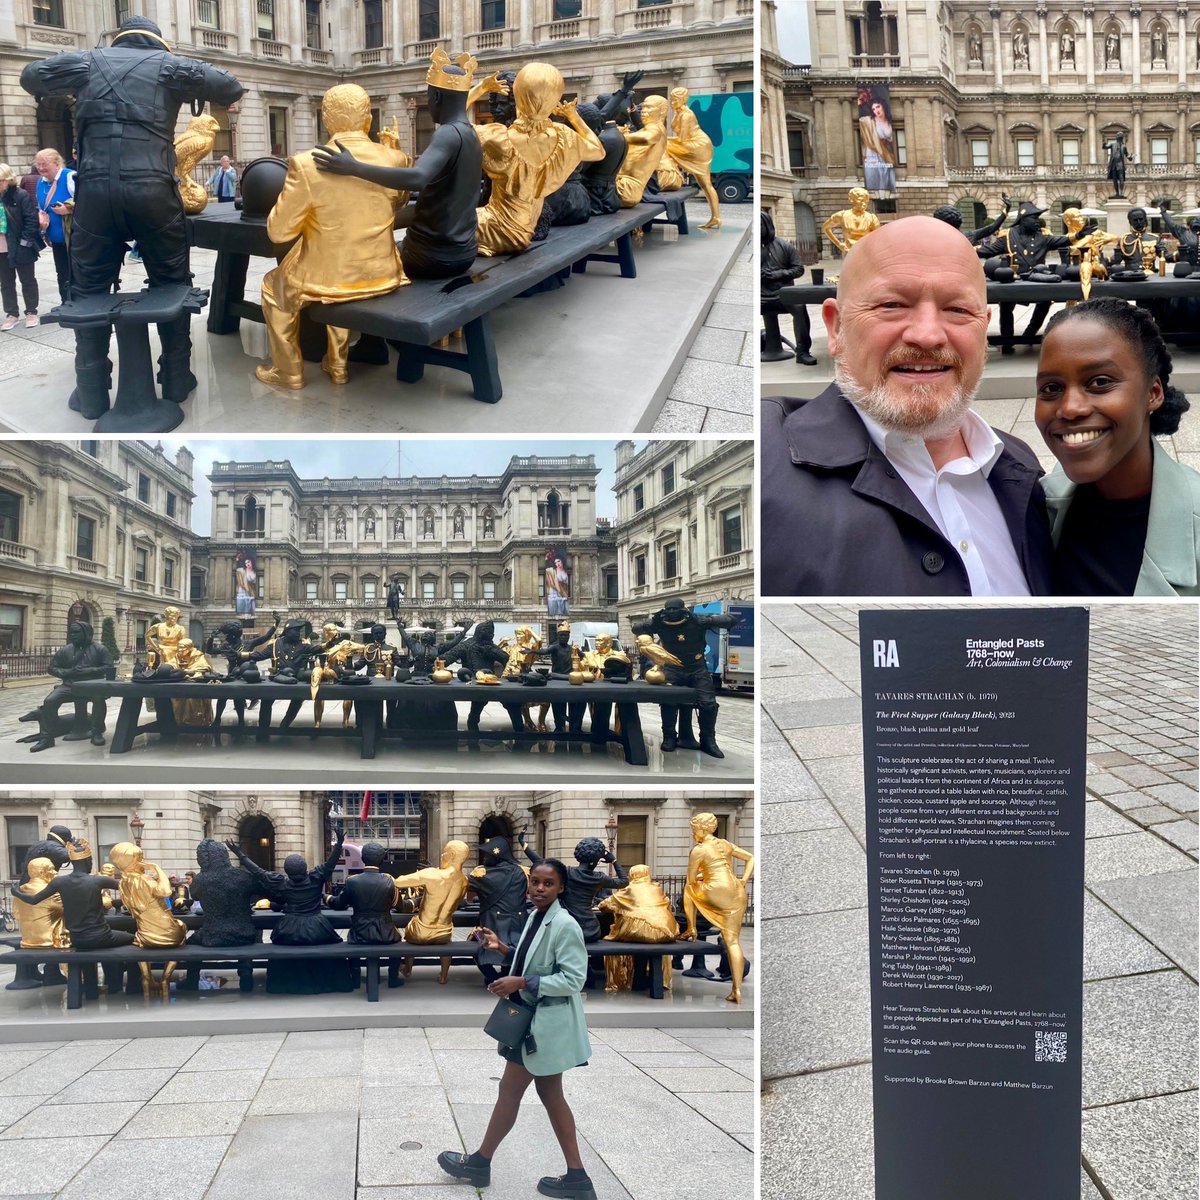 If you’re in and central London then it’s well worth popping along to see the ‘First Supper’ sculpture by Tavares Strachan, outside the @royalacademy. What a magnificent piece of work and a great reminder of people who’ve made massive contributions to society over the years.